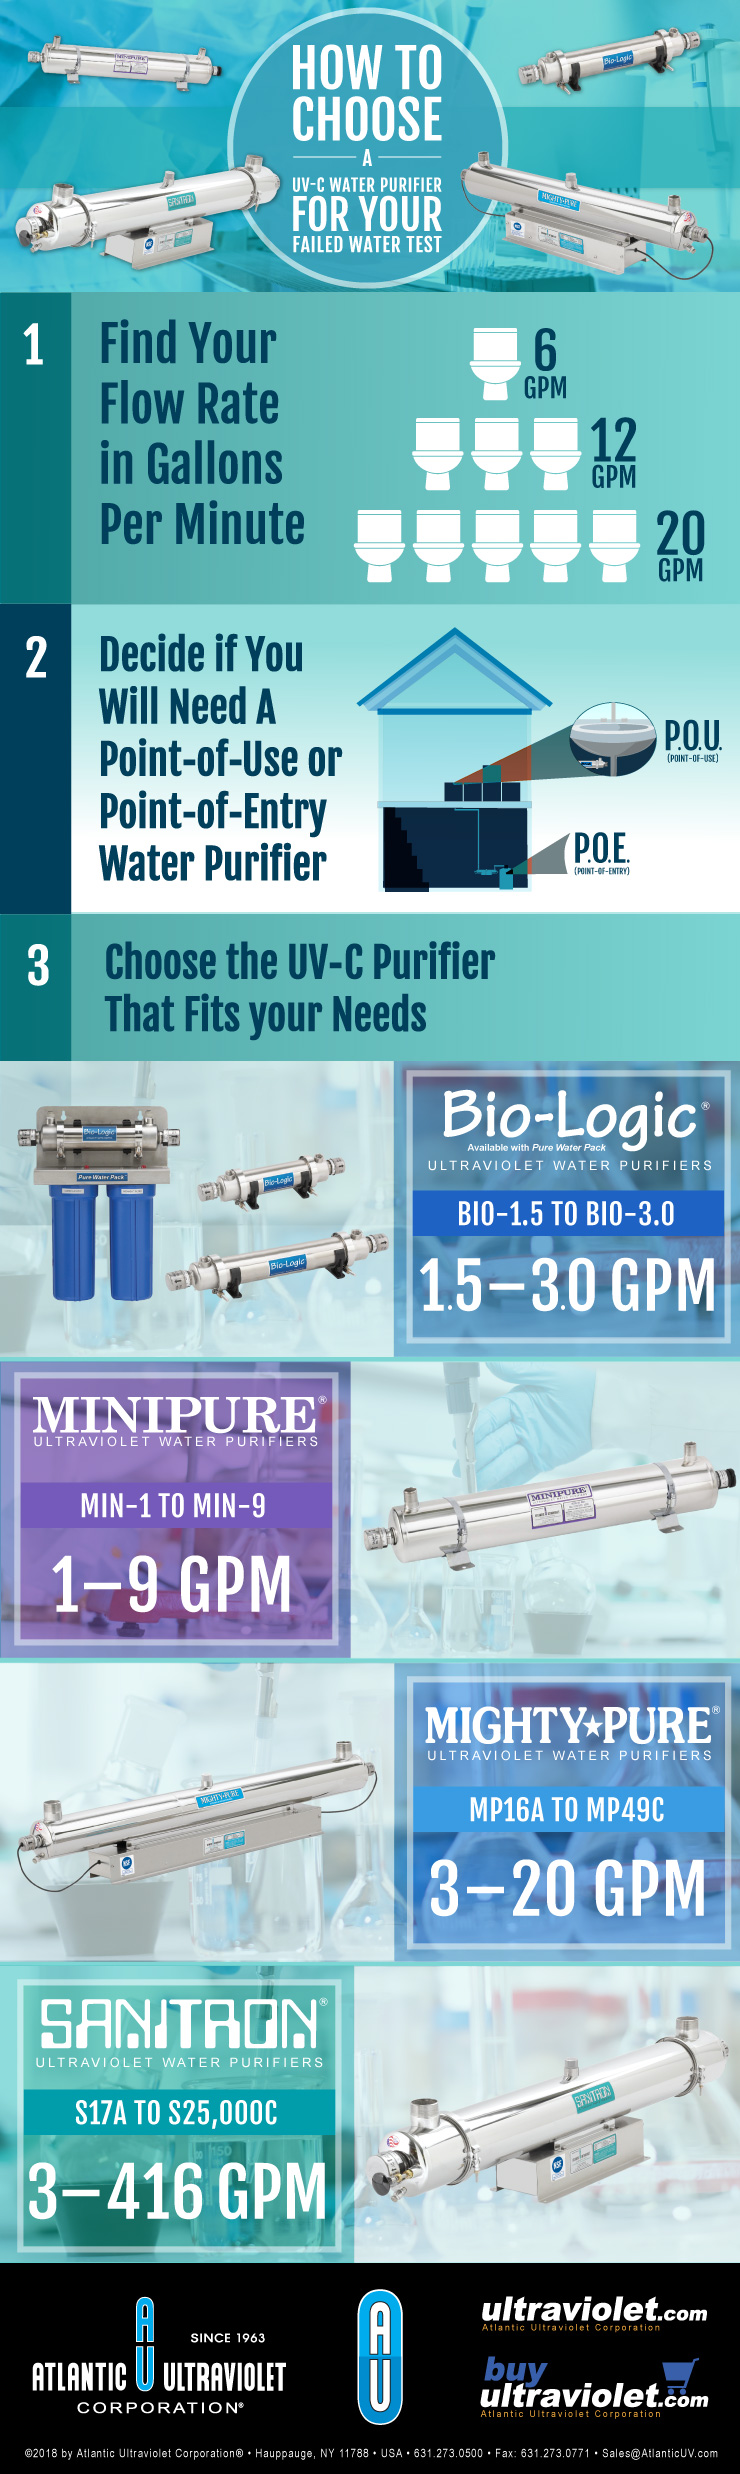 How to Choose a UV-C Water Purifier for Your Failed Water Test